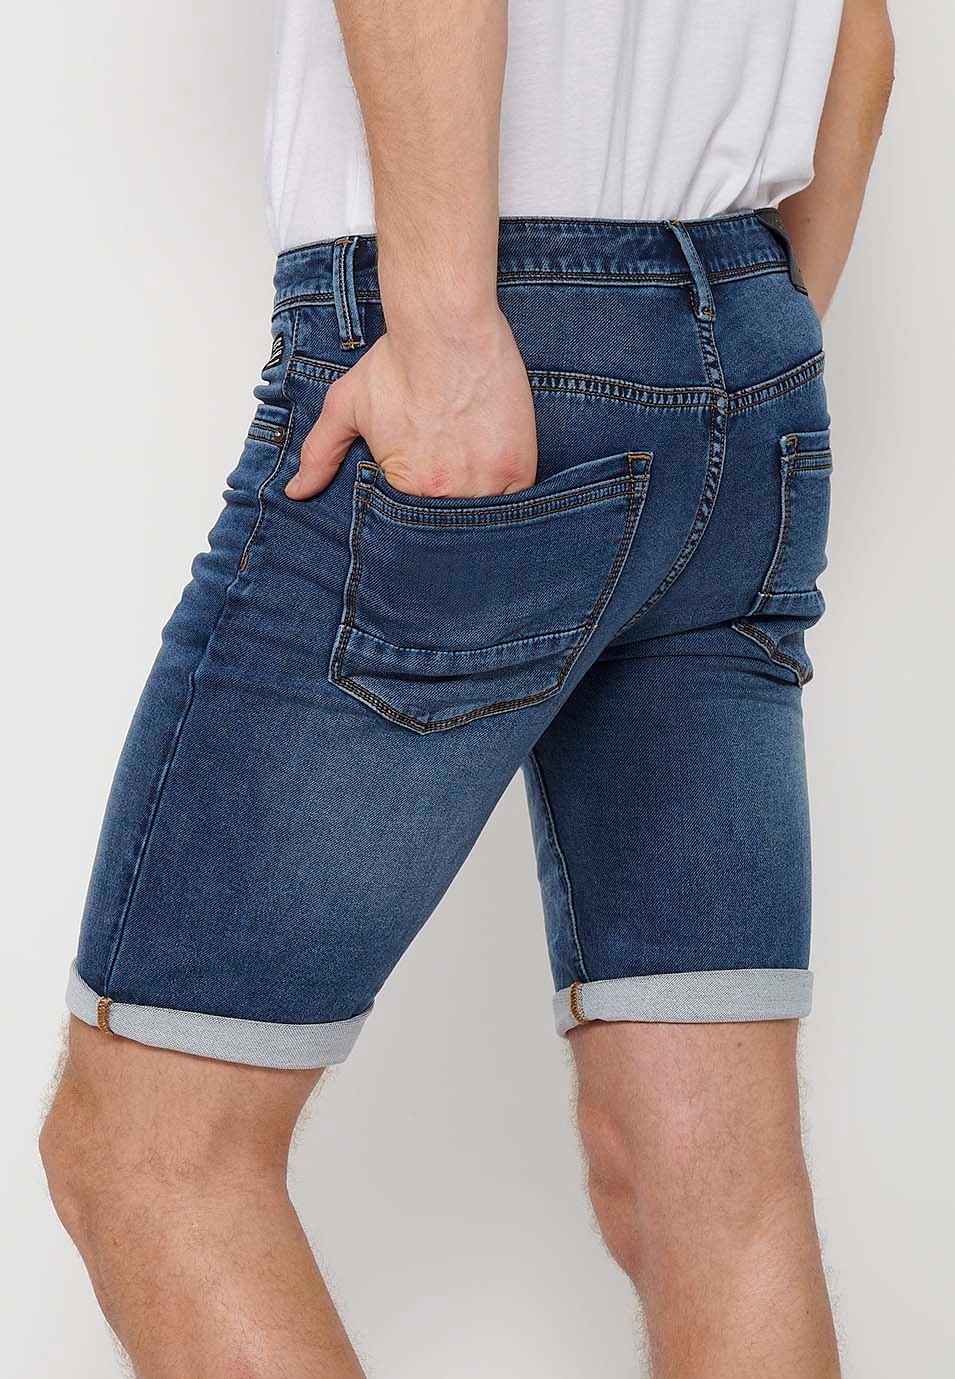 Shorts with turn-up finish with front closure with zipper and button in Blue for Men